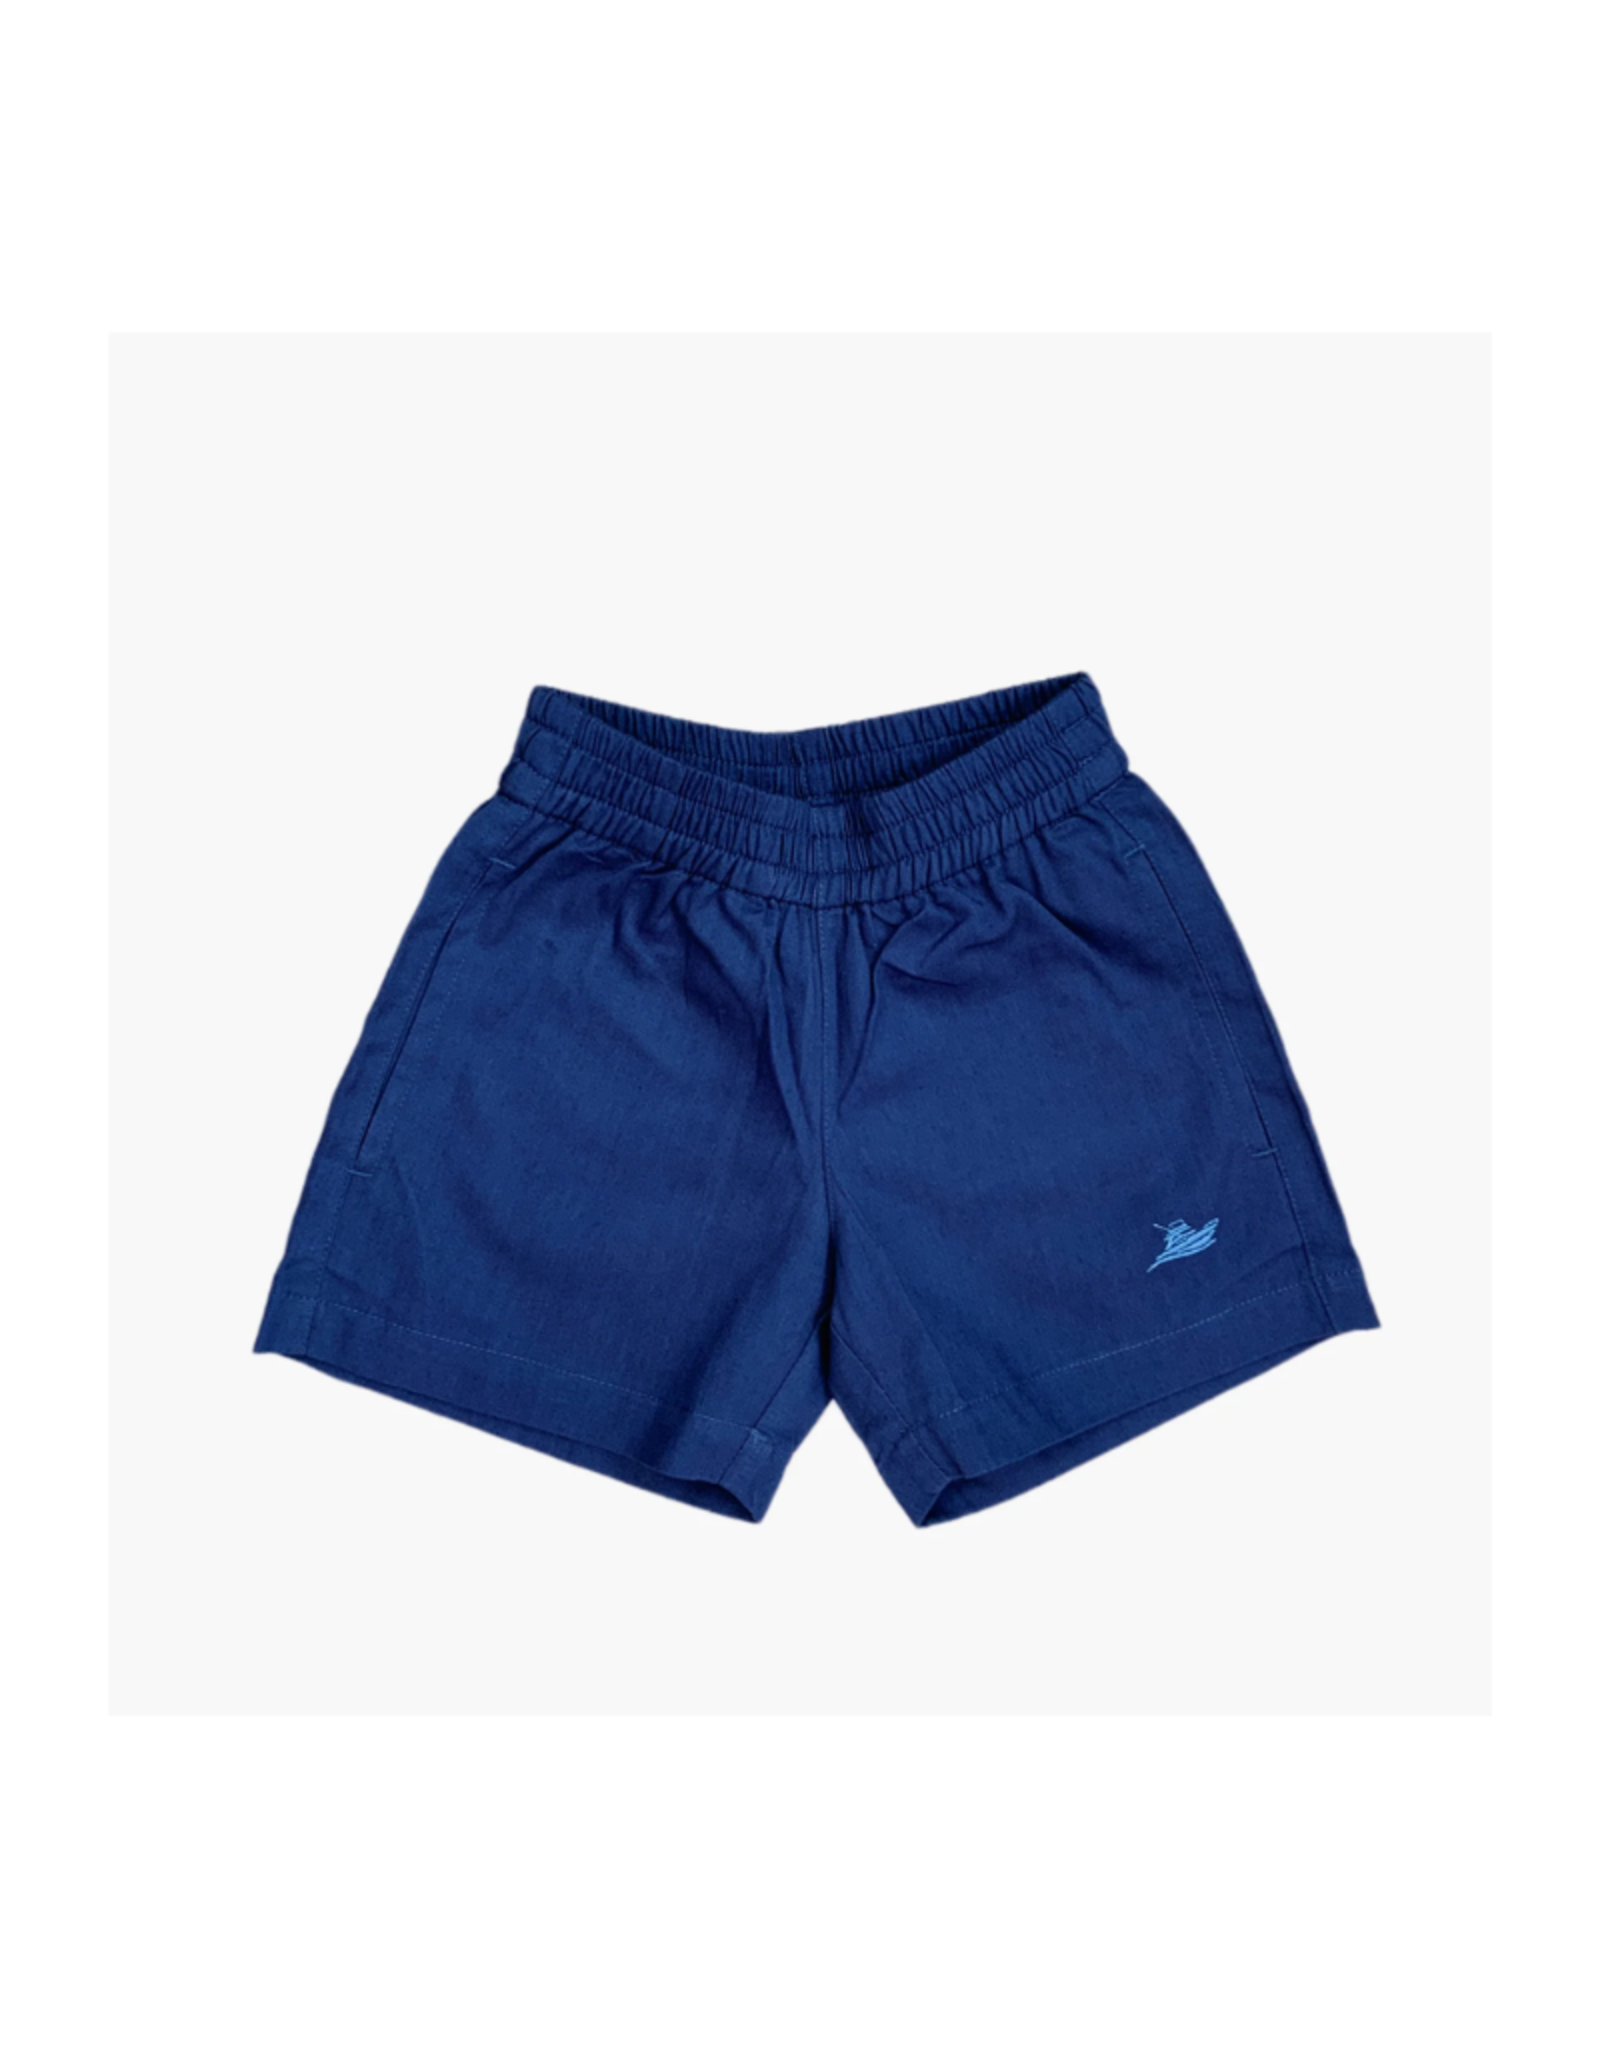 SouthBound Play Shorts Navy